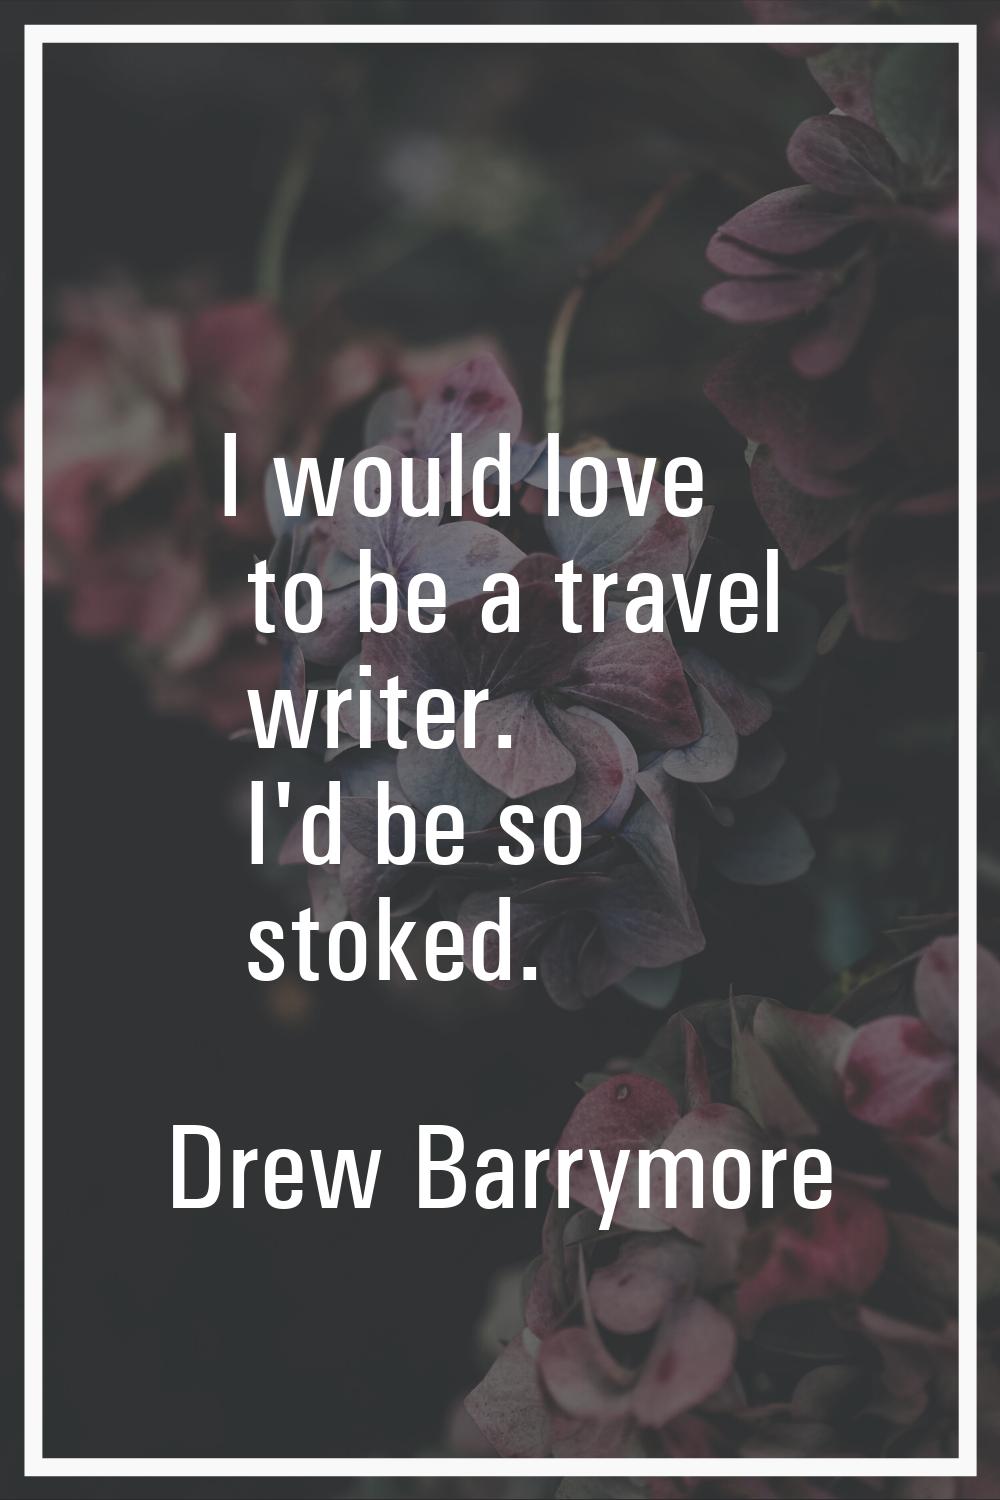 I would love to be a travel writer. I'd be so stoked.